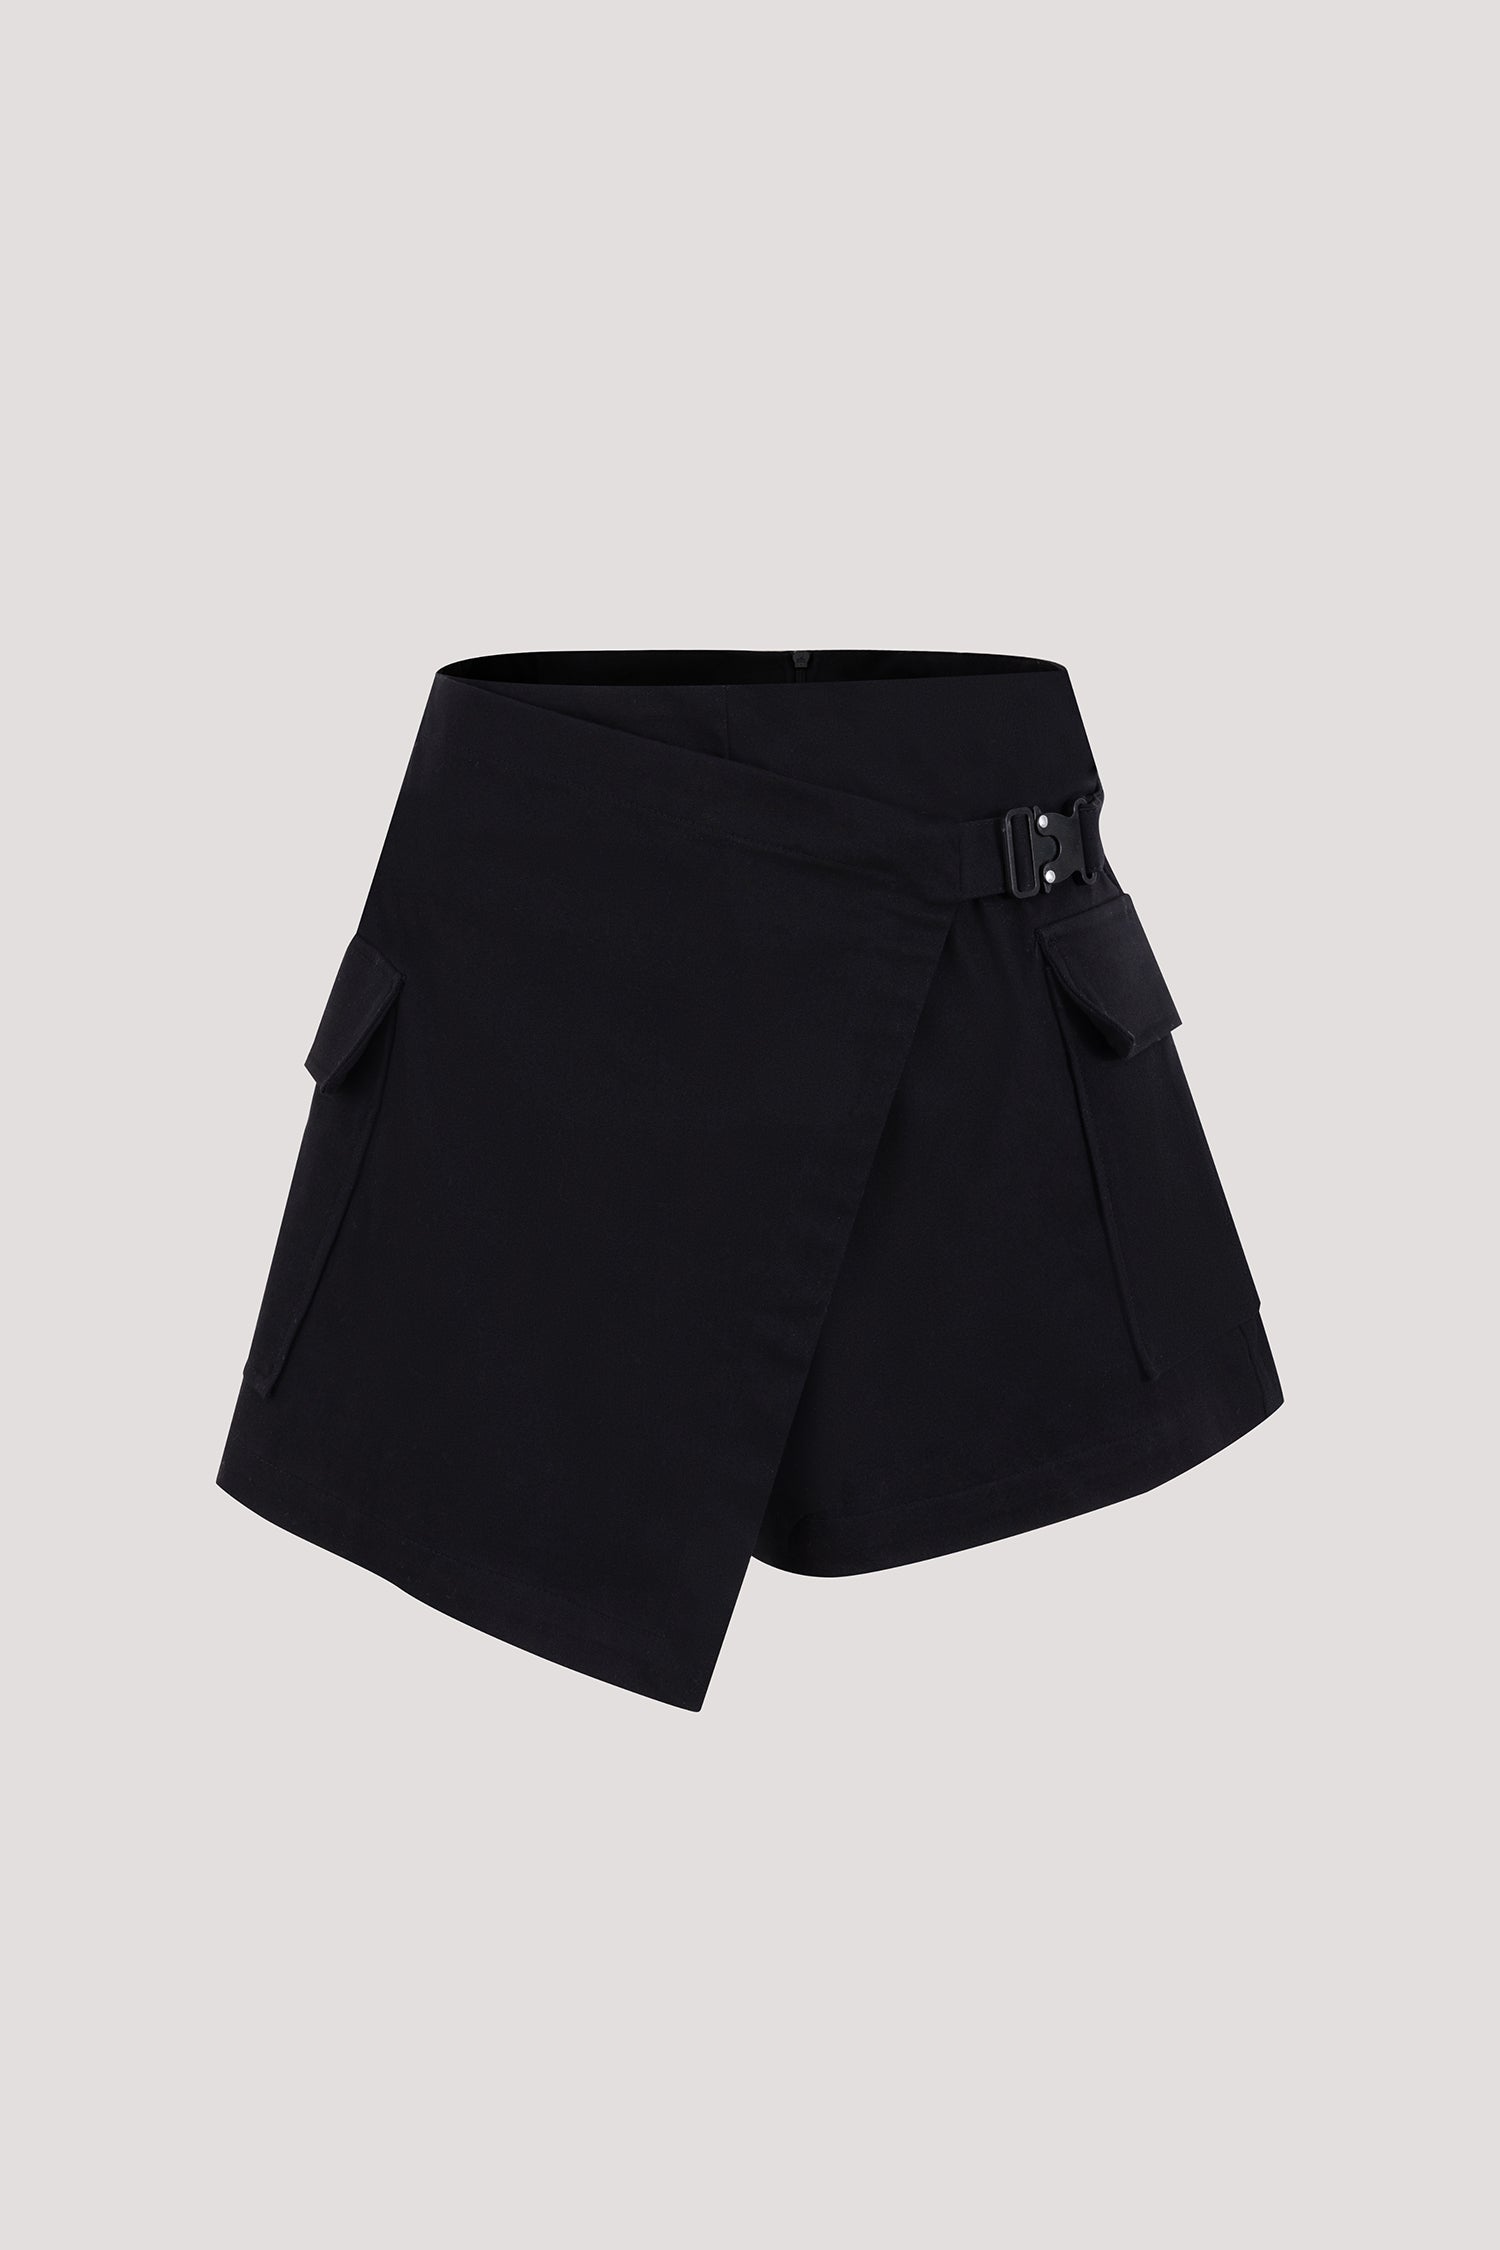 Overlapped Panel Buckle Shorts